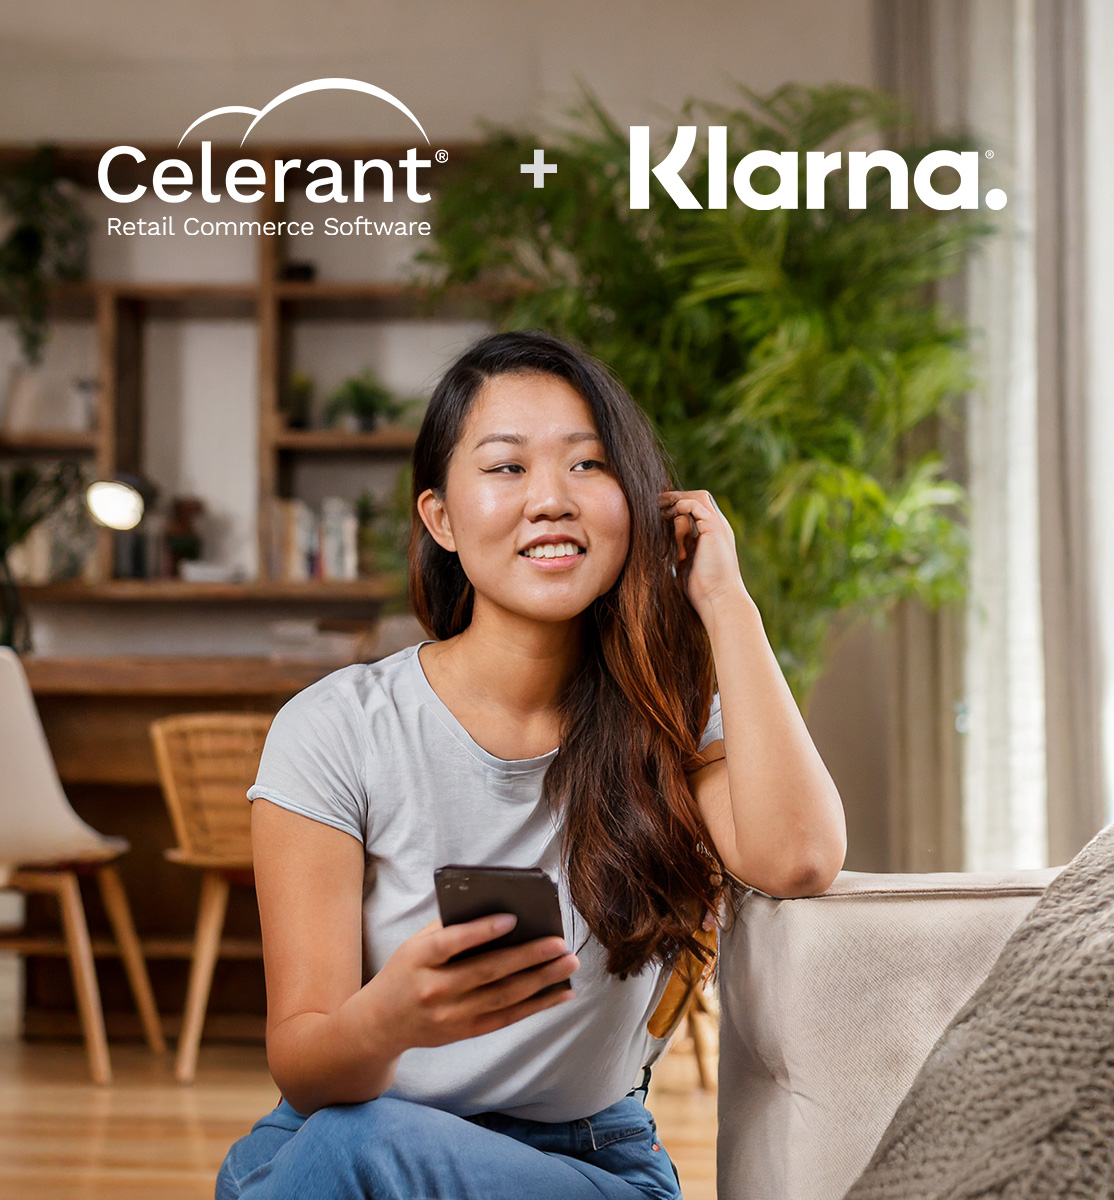 A woman uses Klarna for financing when buying online